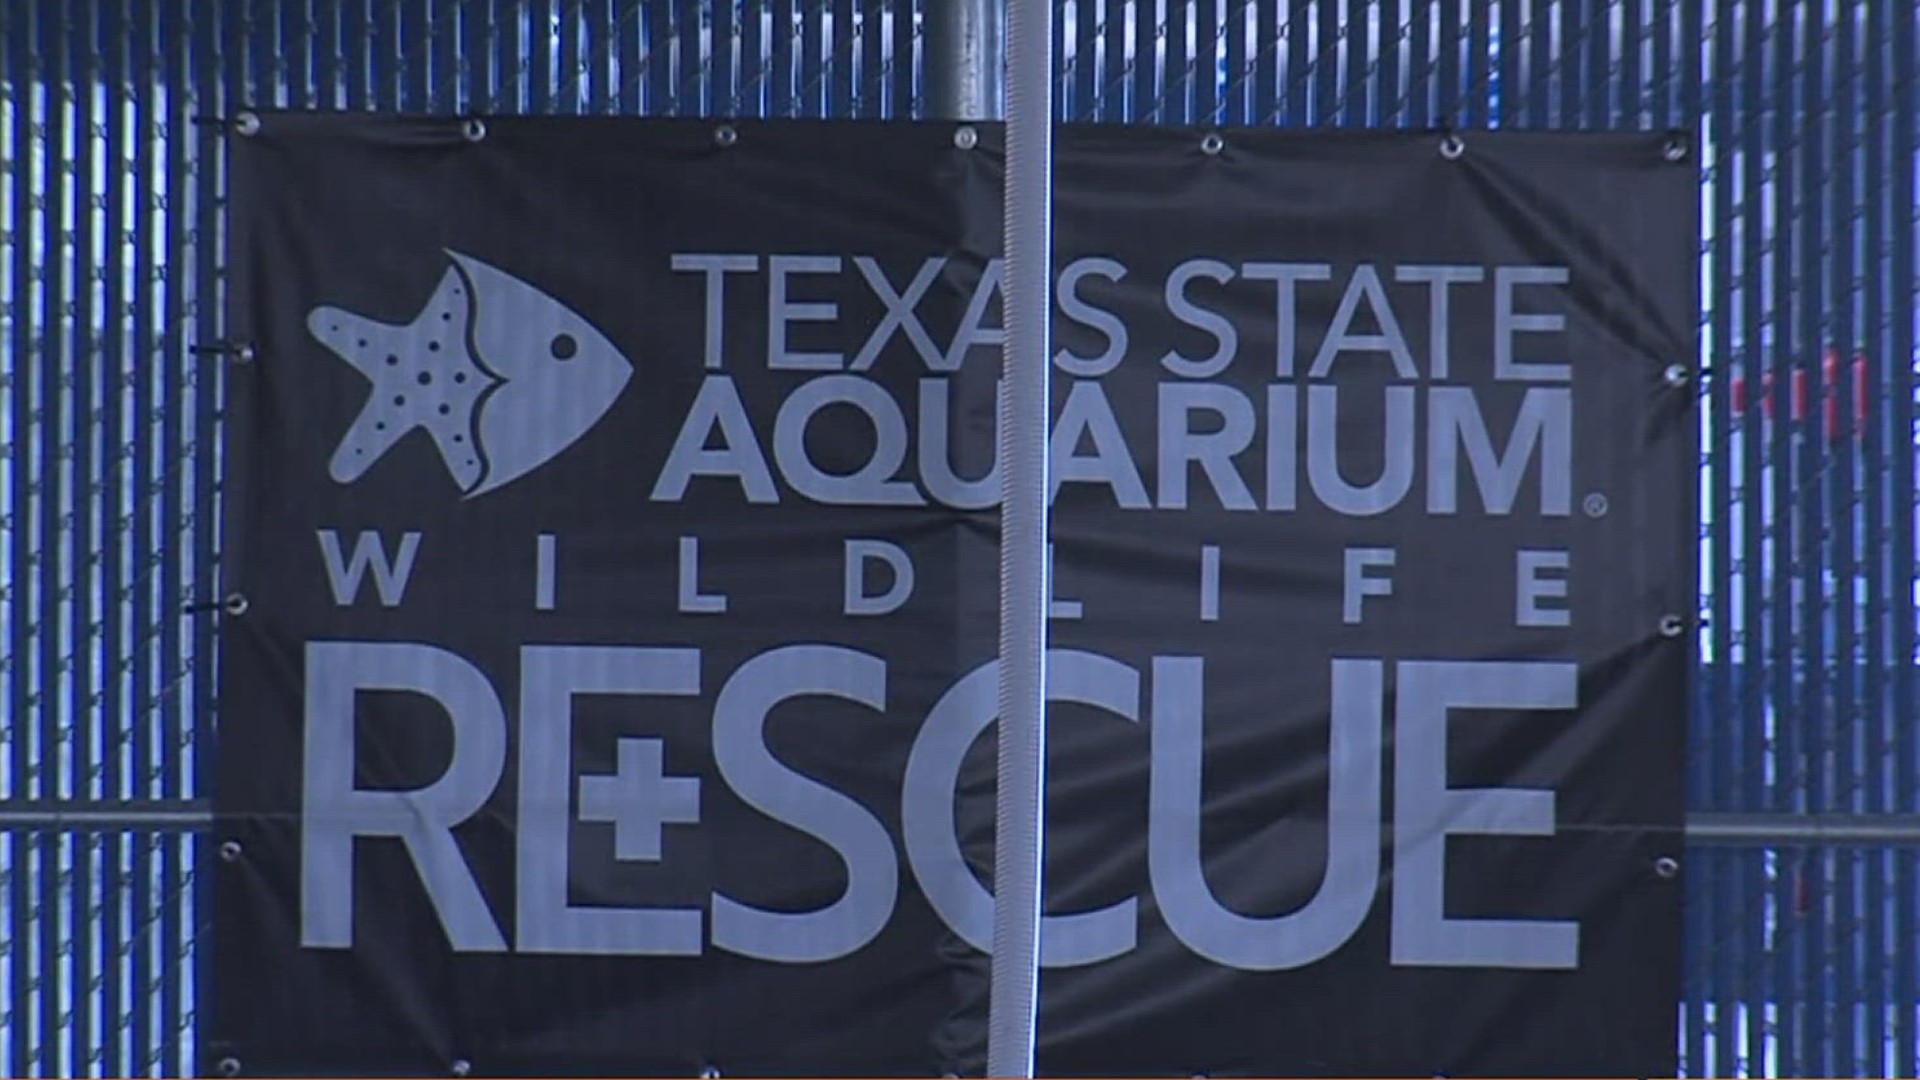 Texas State Aquarium's Center for Wildlife Rescue also will be re-opening after being closed to care for the turtles.